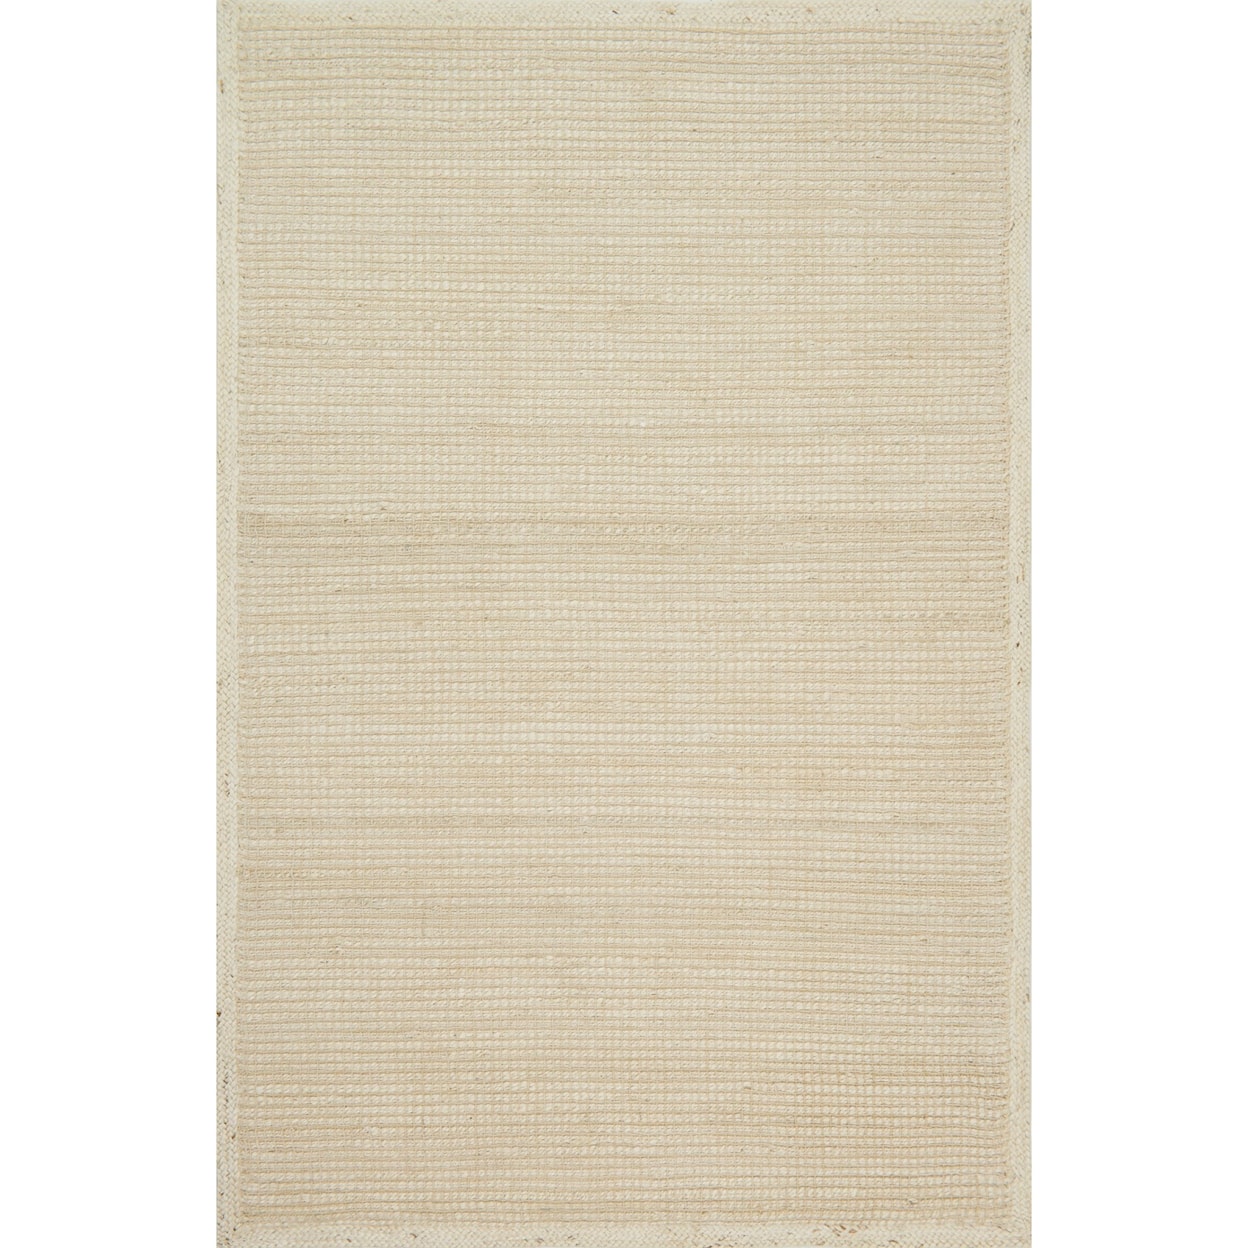 Magnolia Home by Joanna Gaines for Loloi Sydney 9' 3" X 13' Rectangle Rug